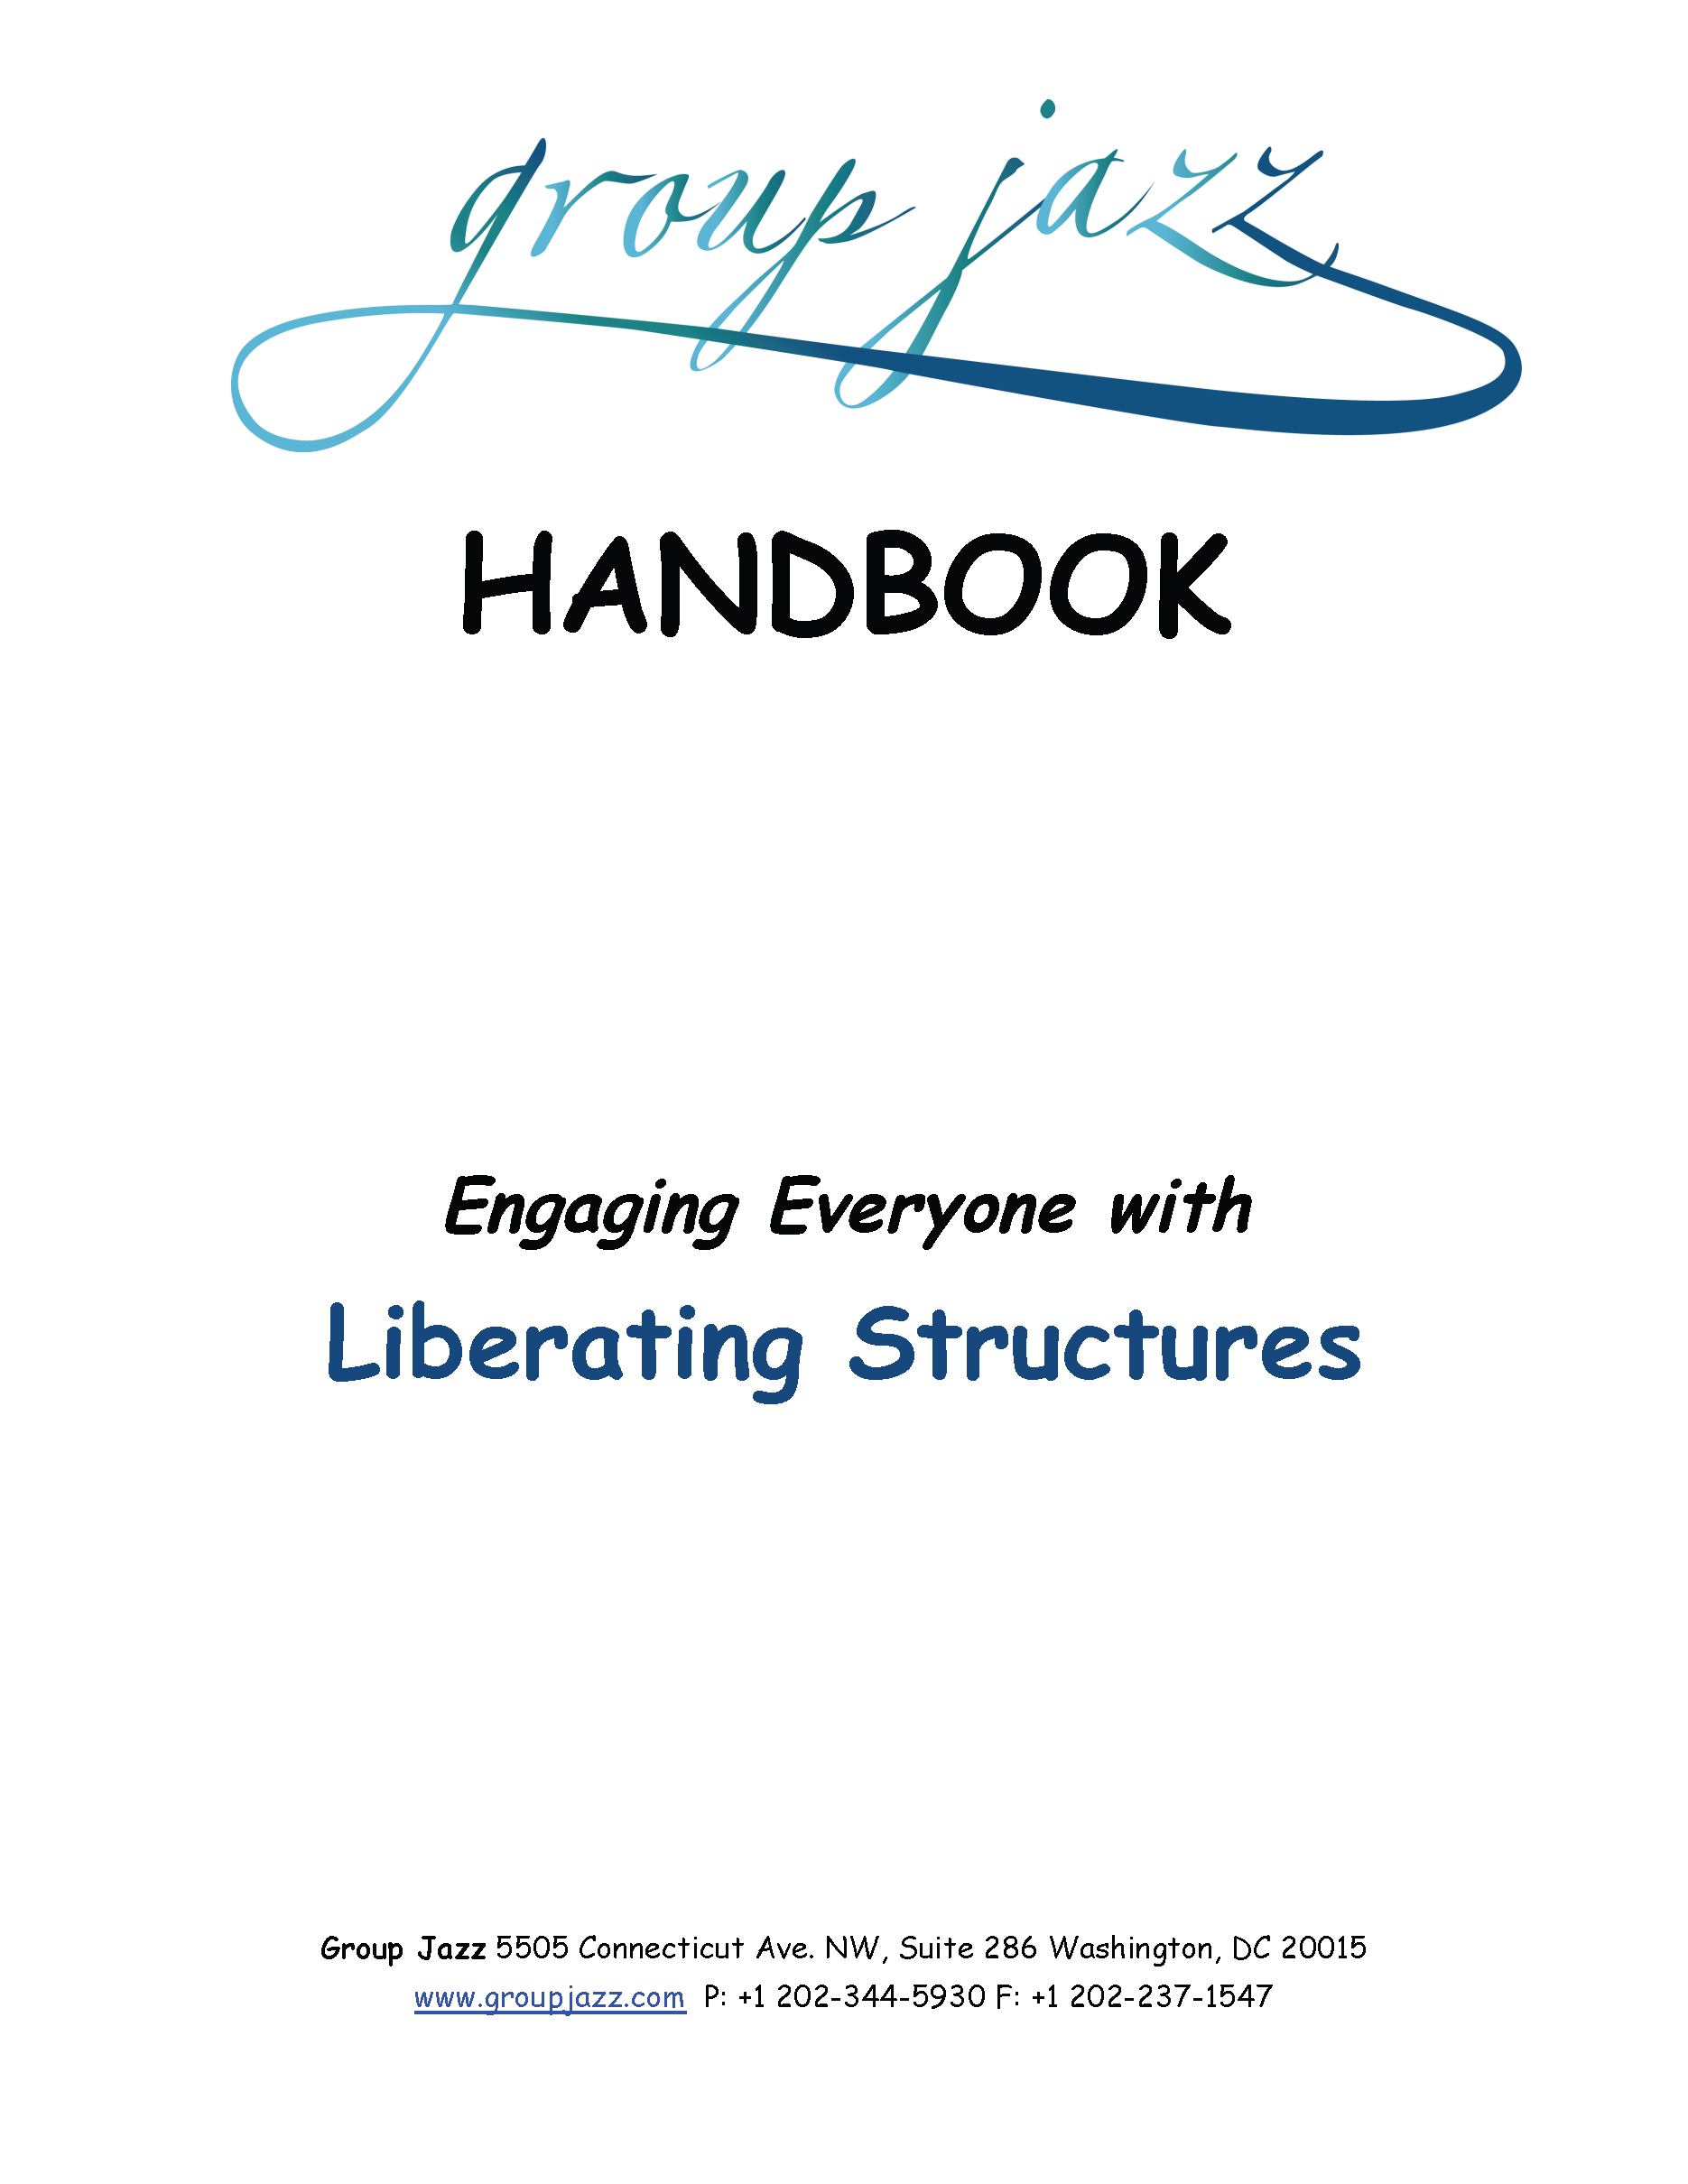 Cover page for Engaging Everyone with Liberating Structures Handbook